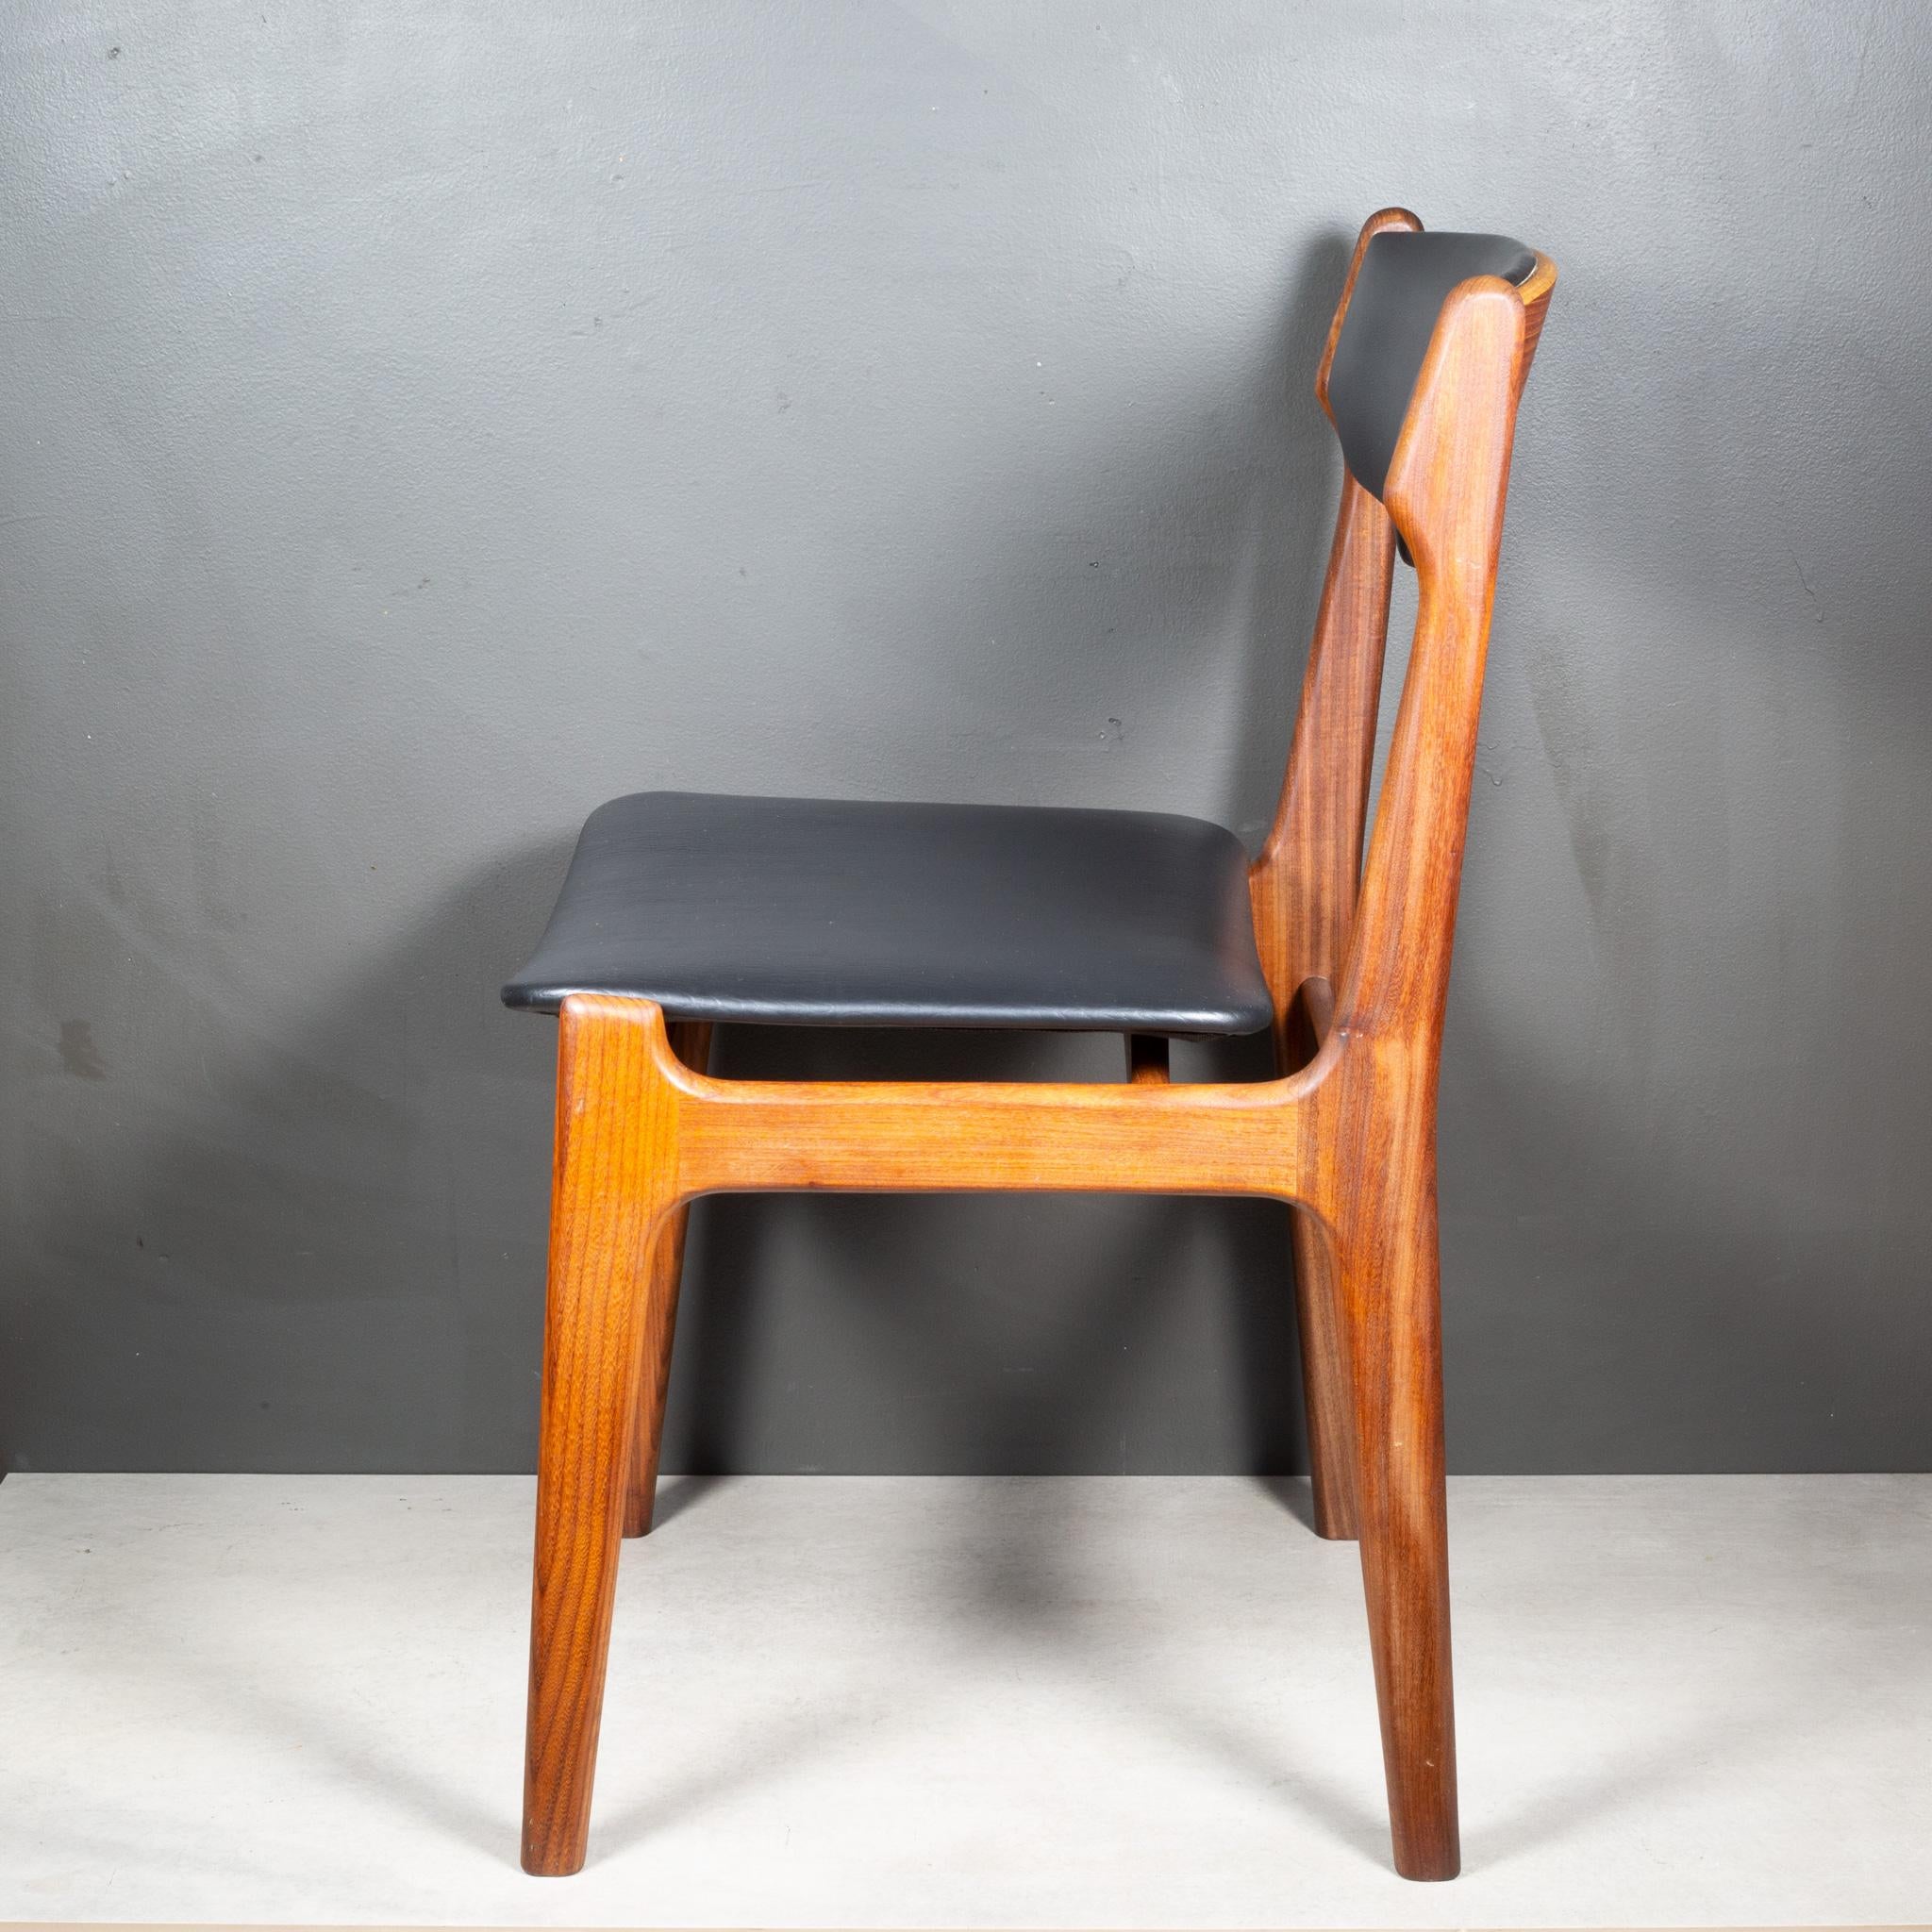  Mid-century Reupholsted Teak Dining Chairs c.1960 For Sale 5